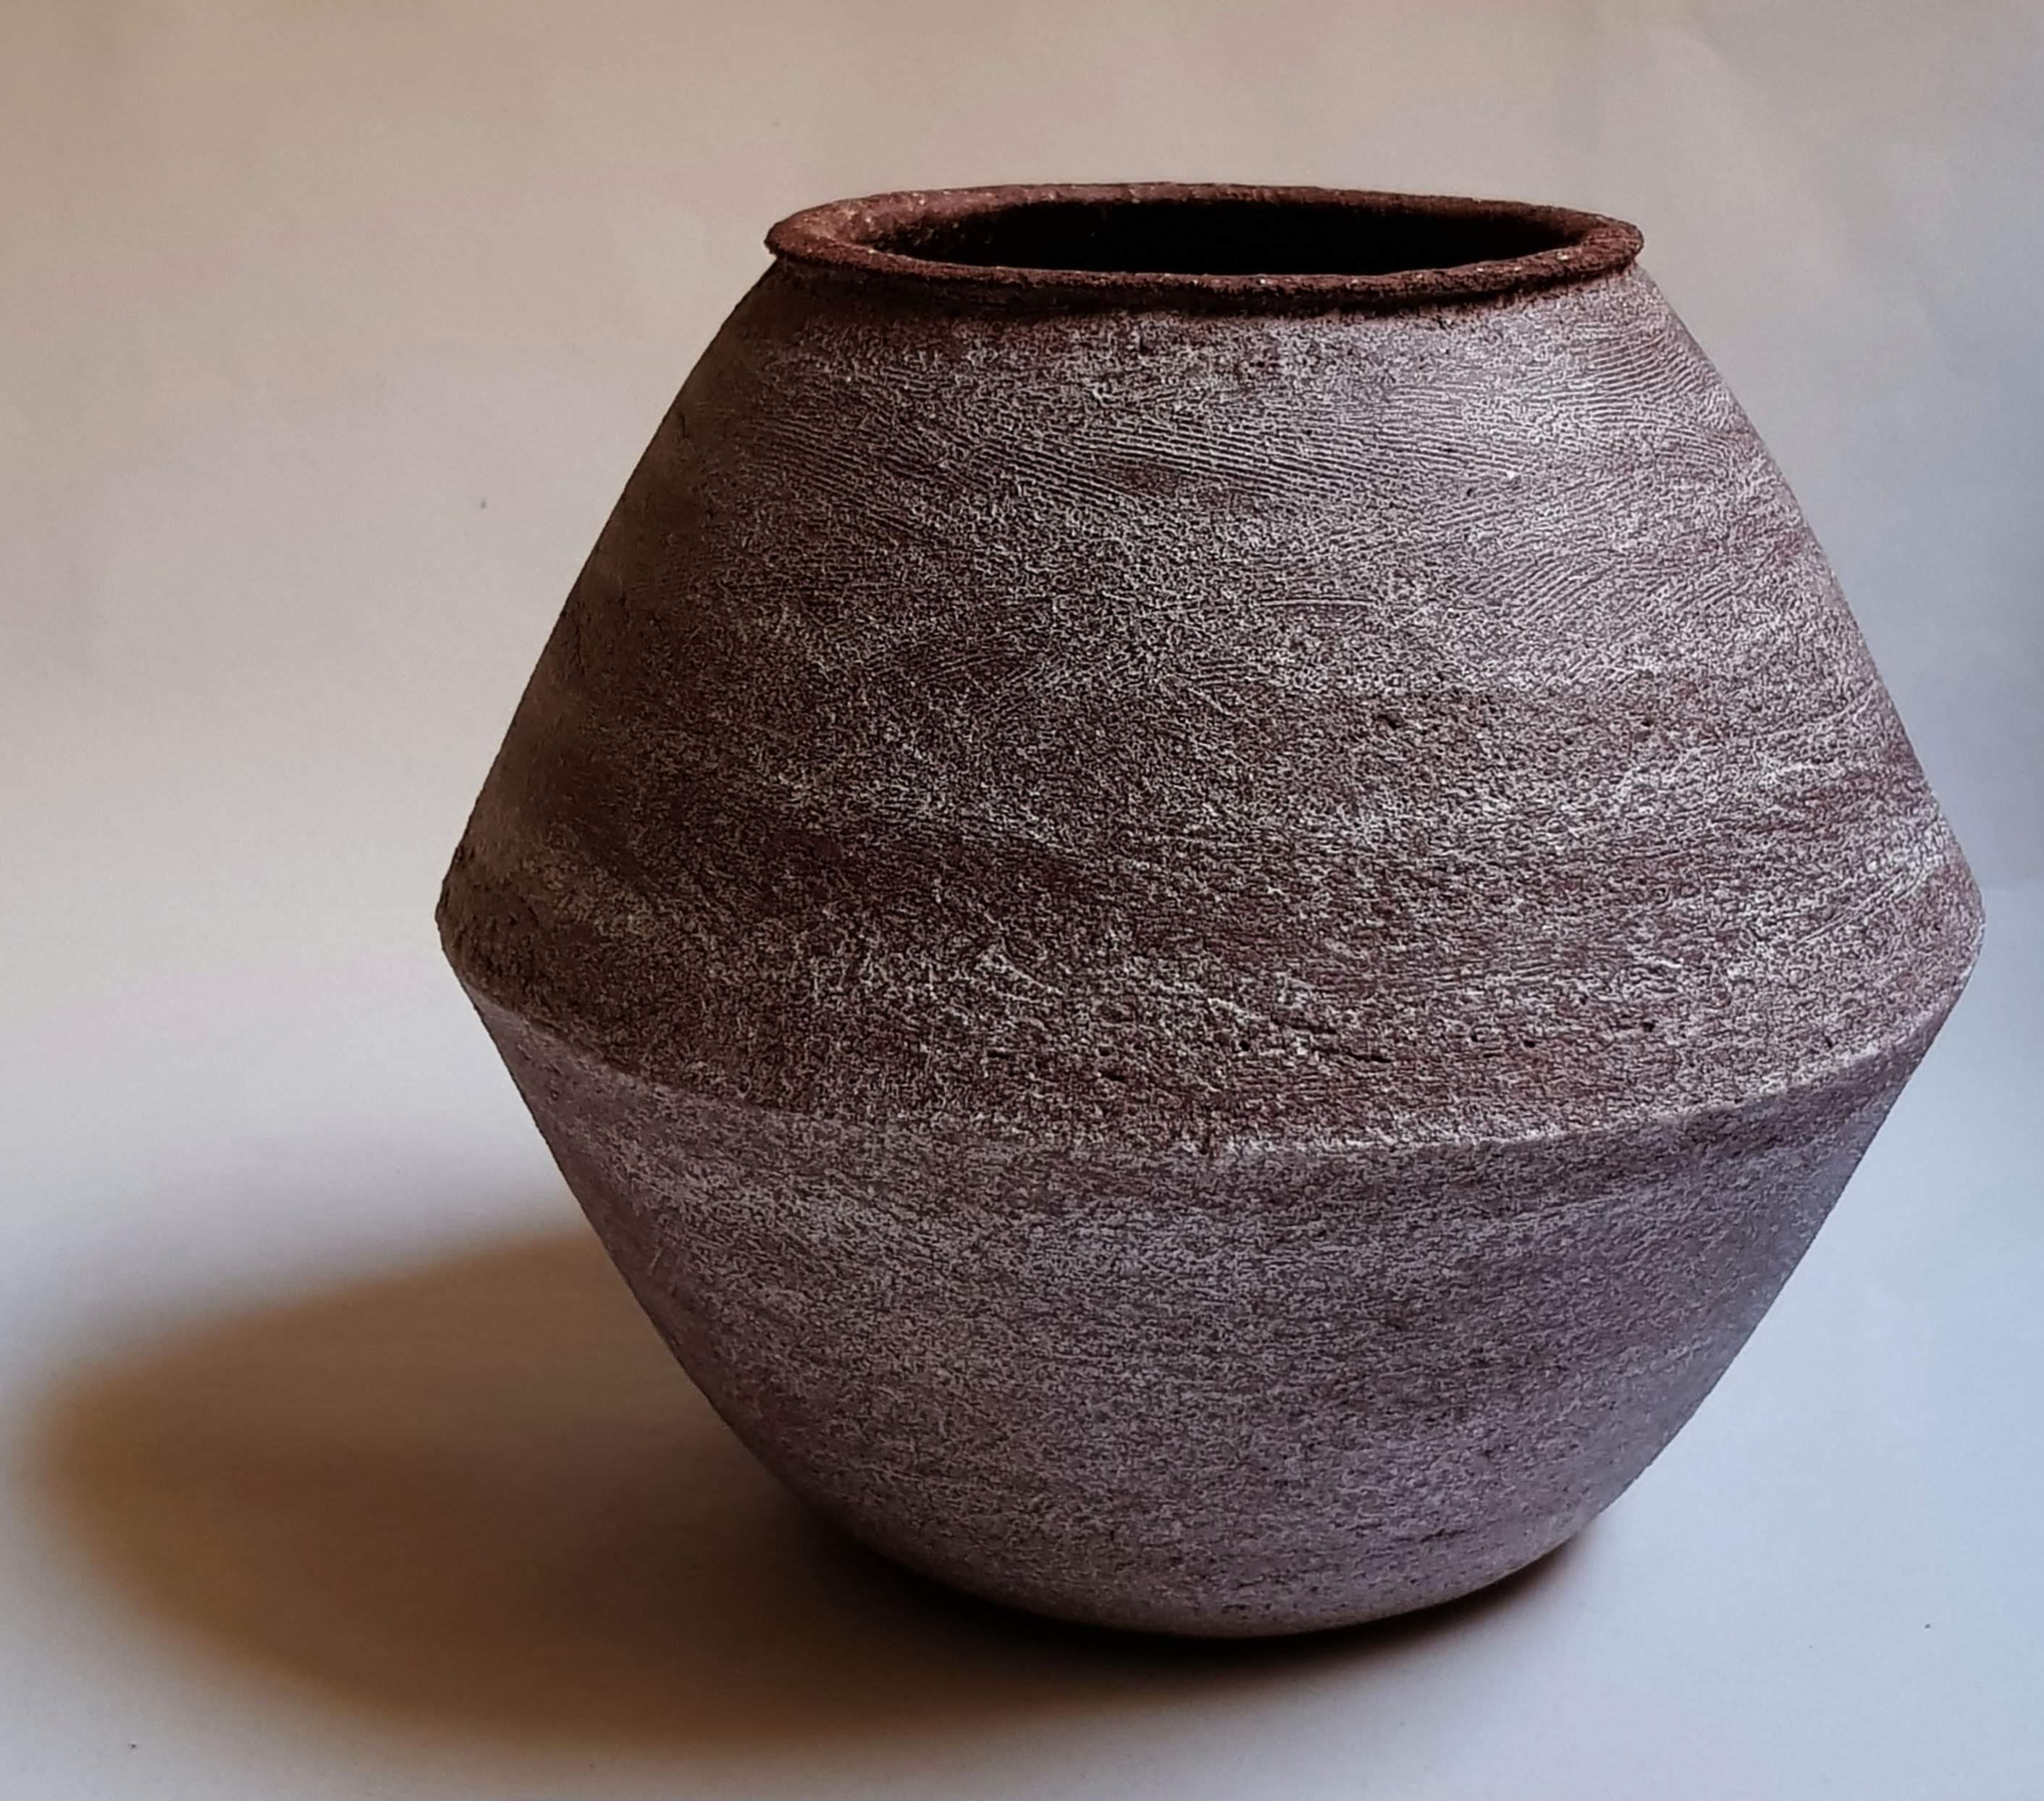 Red Stoneware Sfondyli I Vase by Elena Vasilantonaki
Unique
Dimensions: ⌀ 30 x H 25 cm (Dimensions may vary)
Materials: Stoneware
Available finishes: Black, Beige, Brown, Red, White Patina

Growing up in Greece I was surrounded by pottery forms that